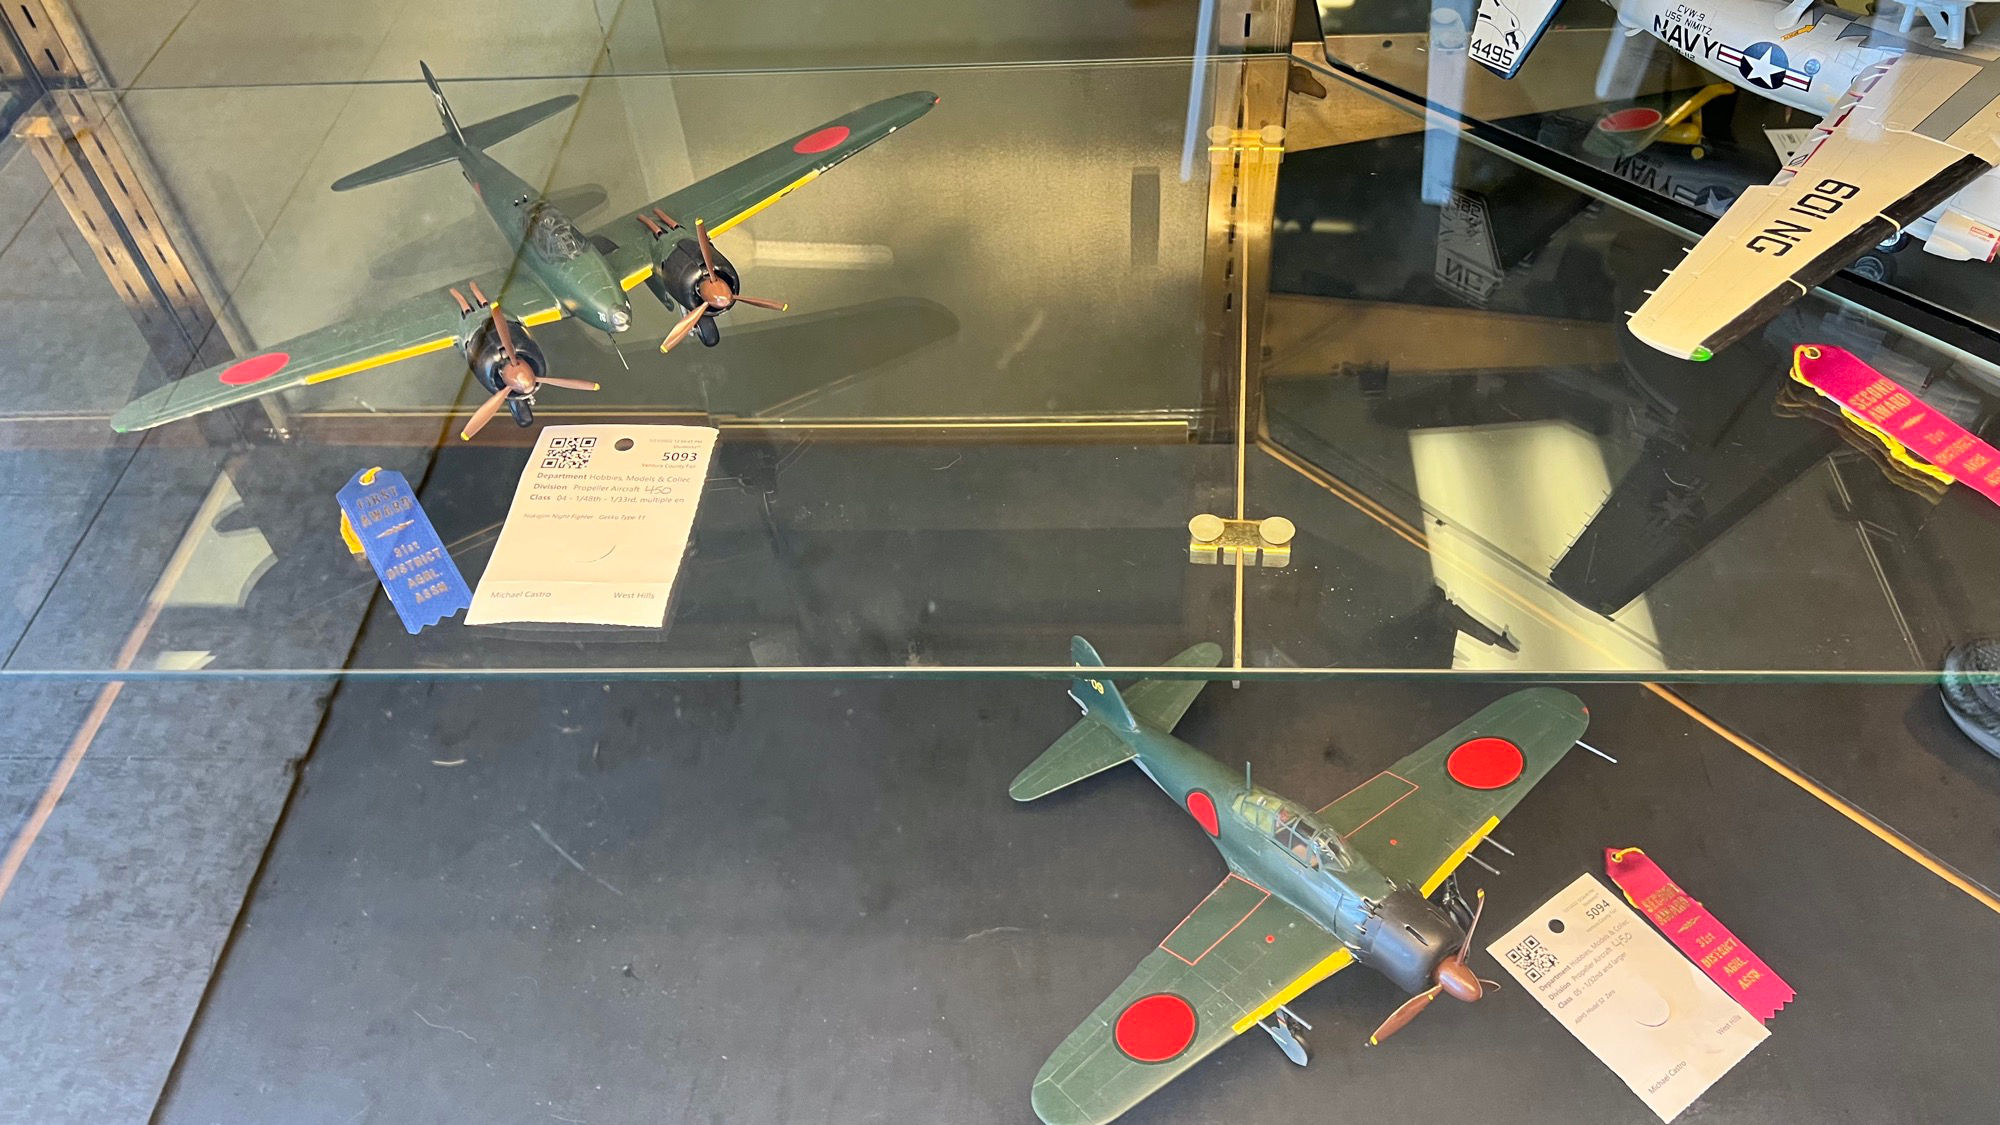 Scale Model Airplanes